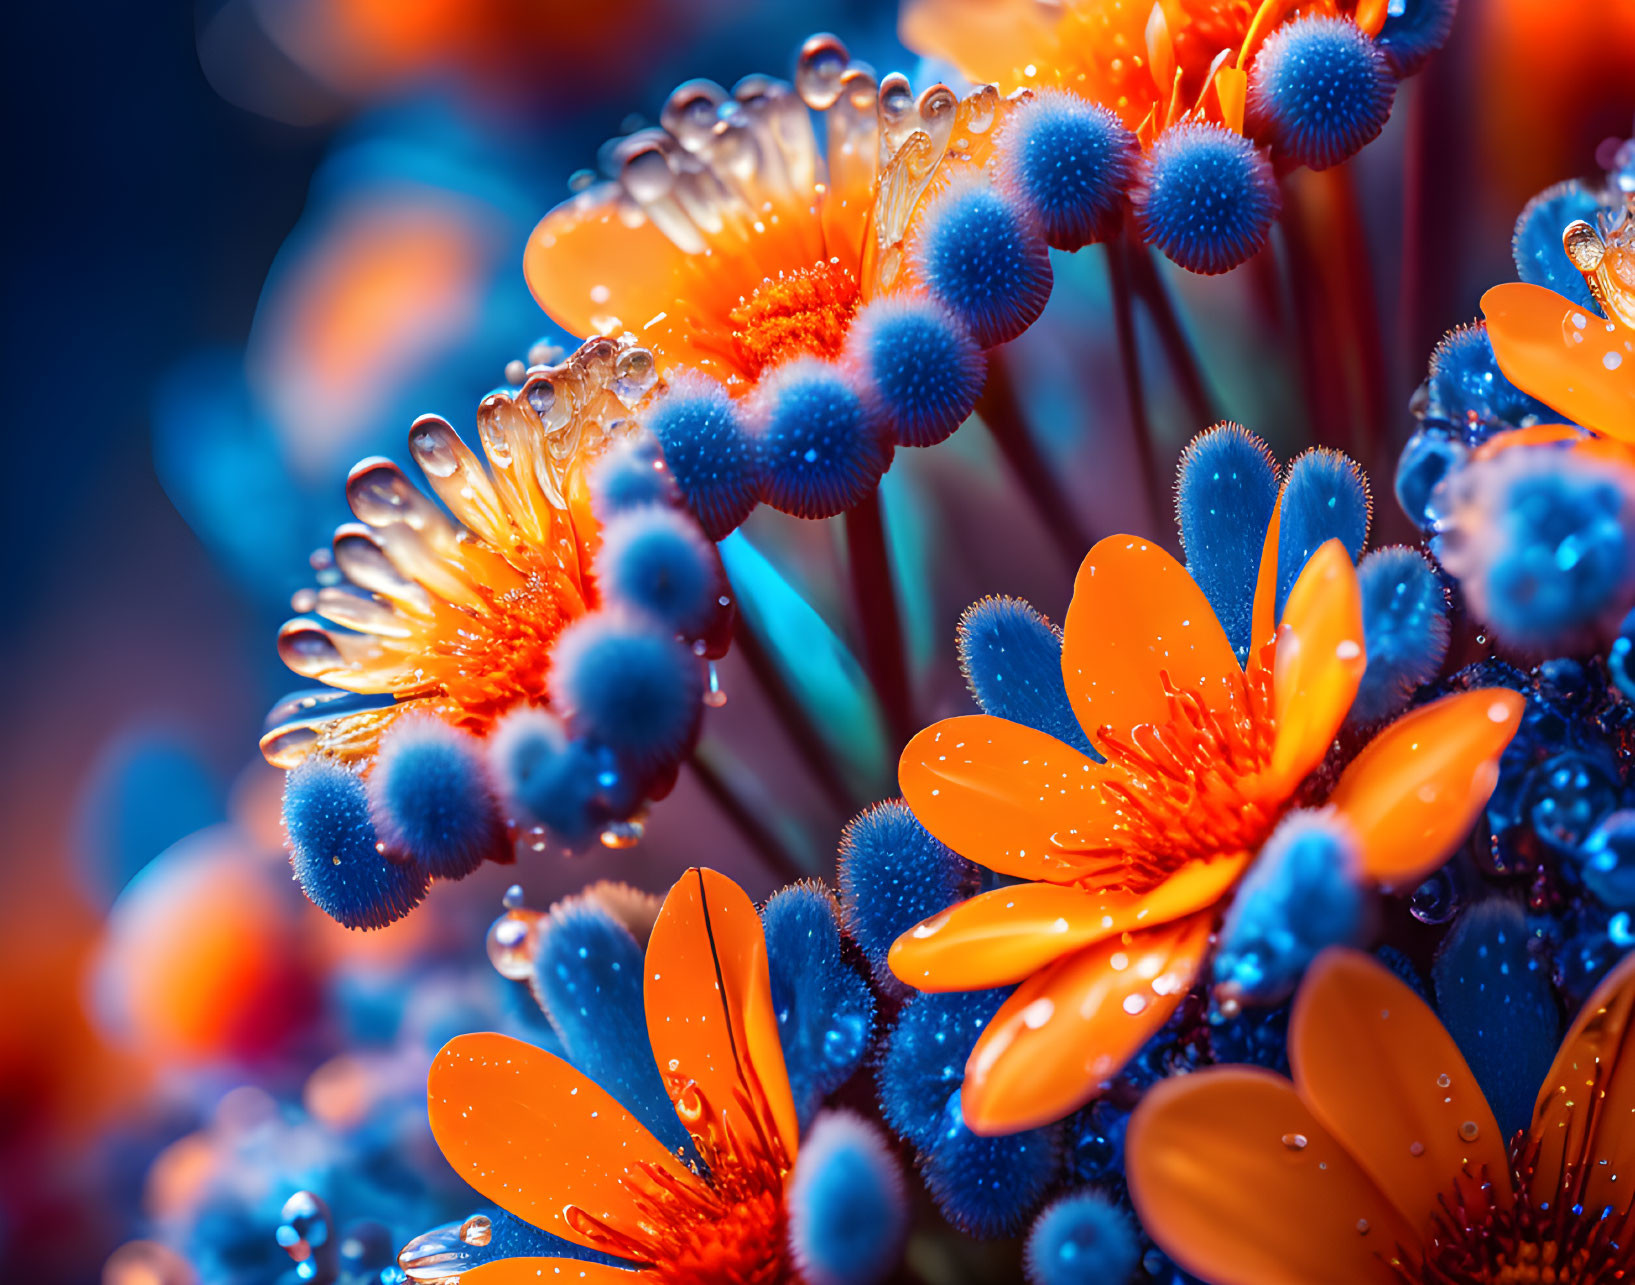 Orange and Blue Flowers with Water Droplets on Petals in Fresh Dewy Look